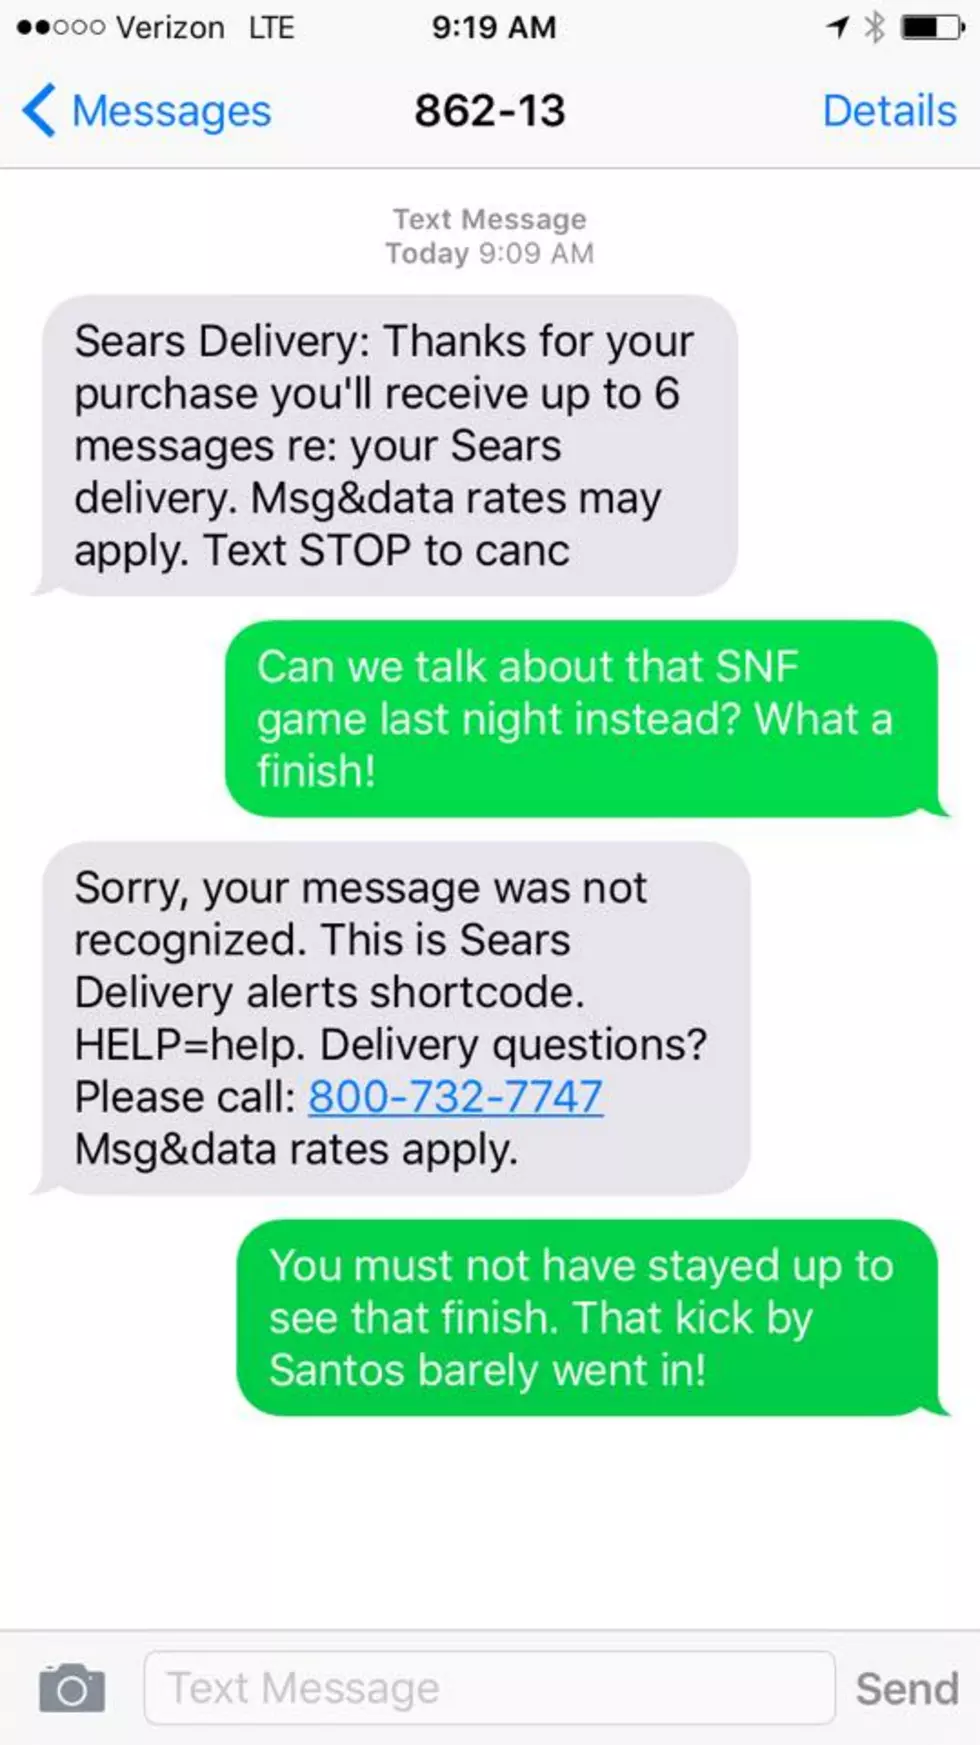 How to Troll SMS Texting Companies